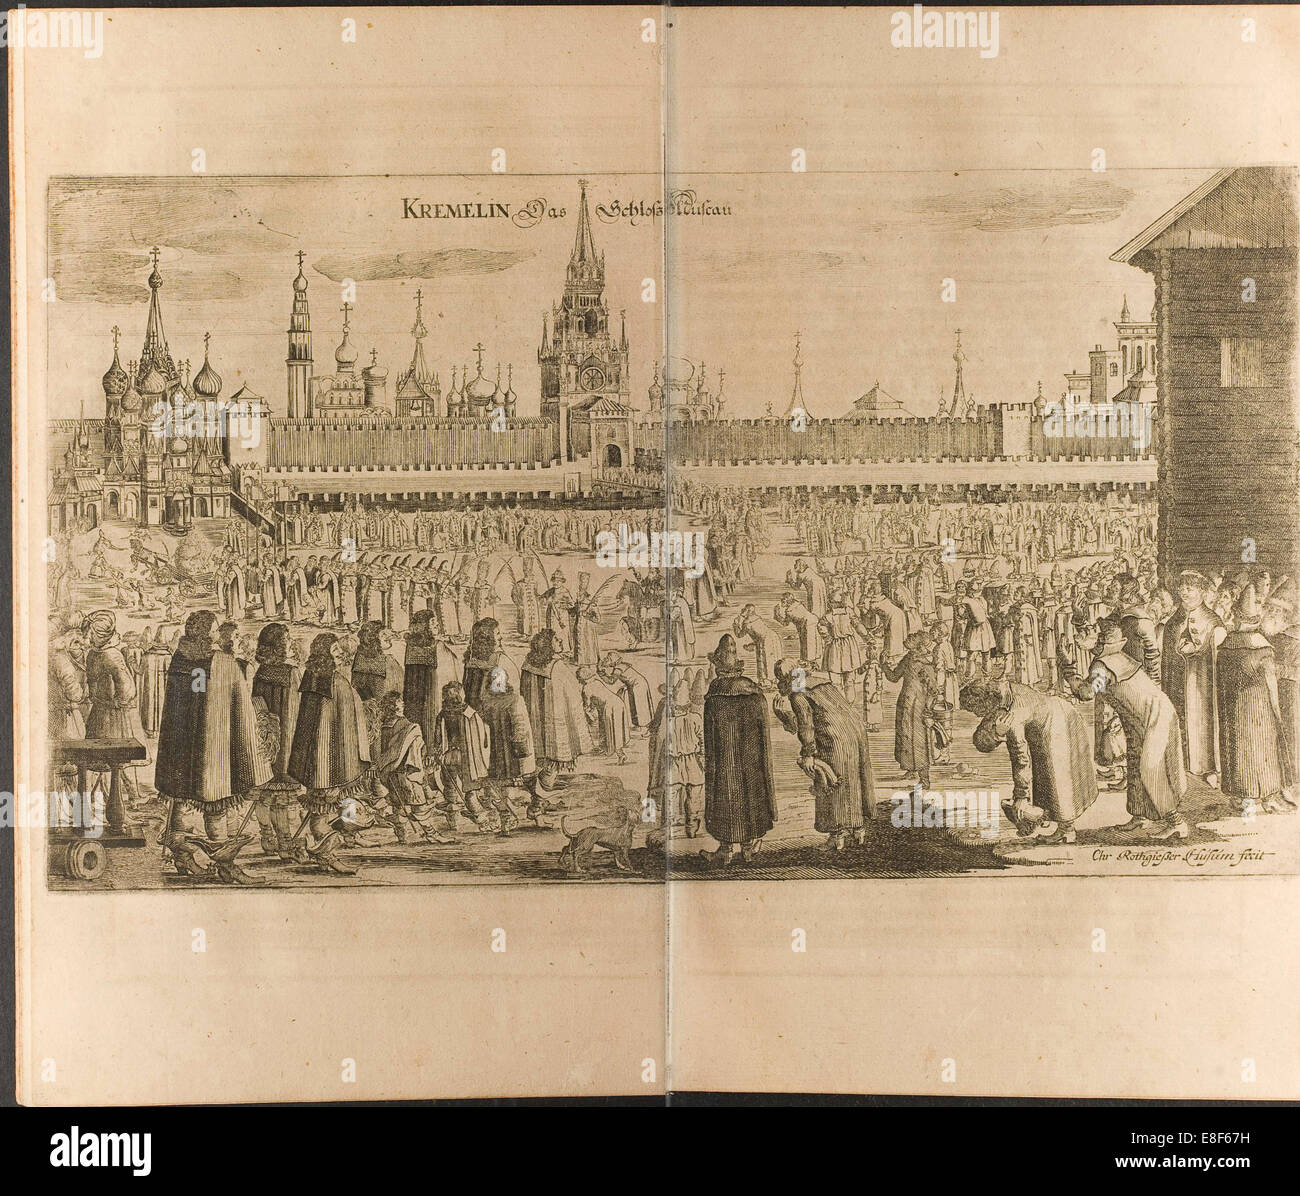 The donkey walk in the Moscow Kremlin (Illustration from Travels to the Great Duke of Muscovy and t Artist: Rothgiesser, Christian Lorenzen (?-1659) Stock Photo